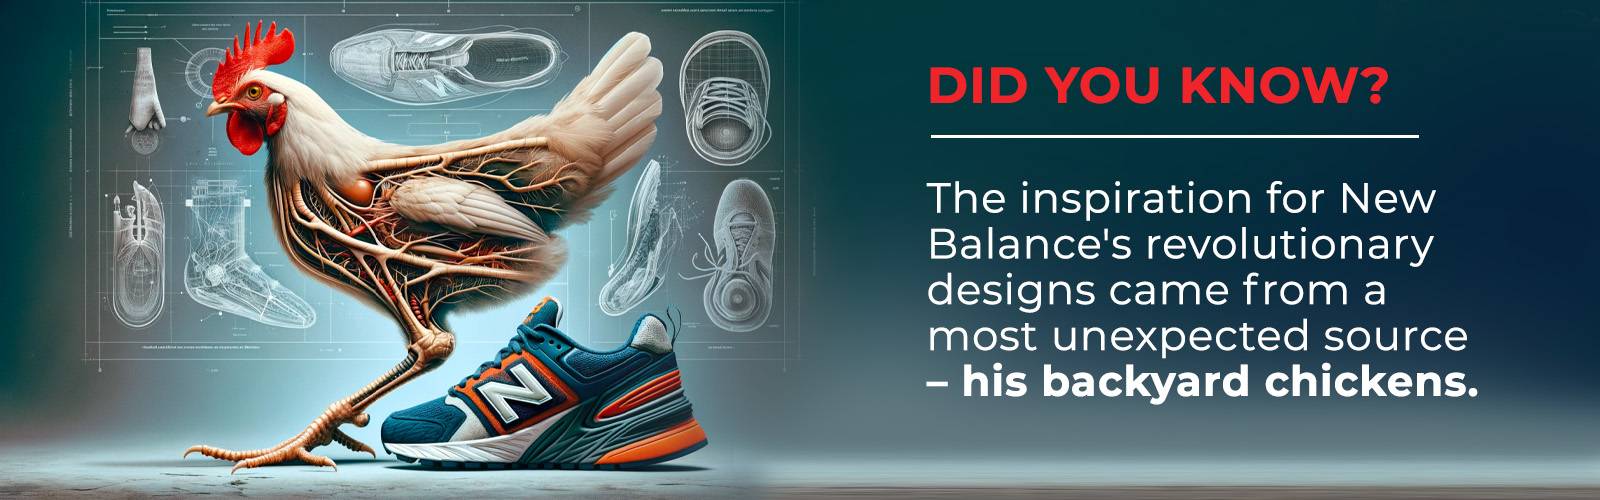 How did New Balance design idea come into place